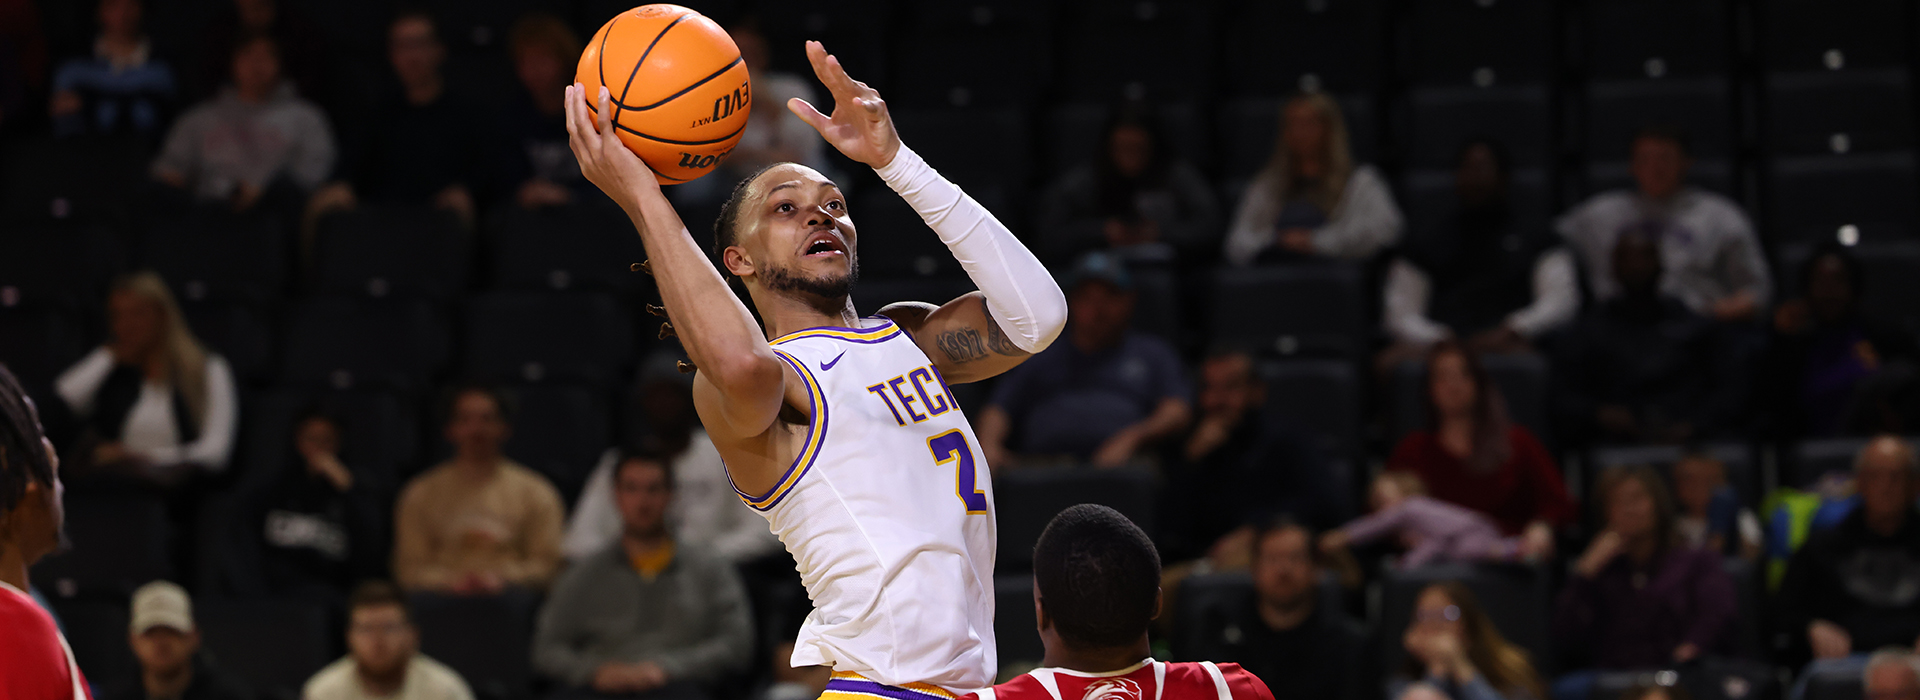 Golden Eagles power past SIUE behind strong shooting